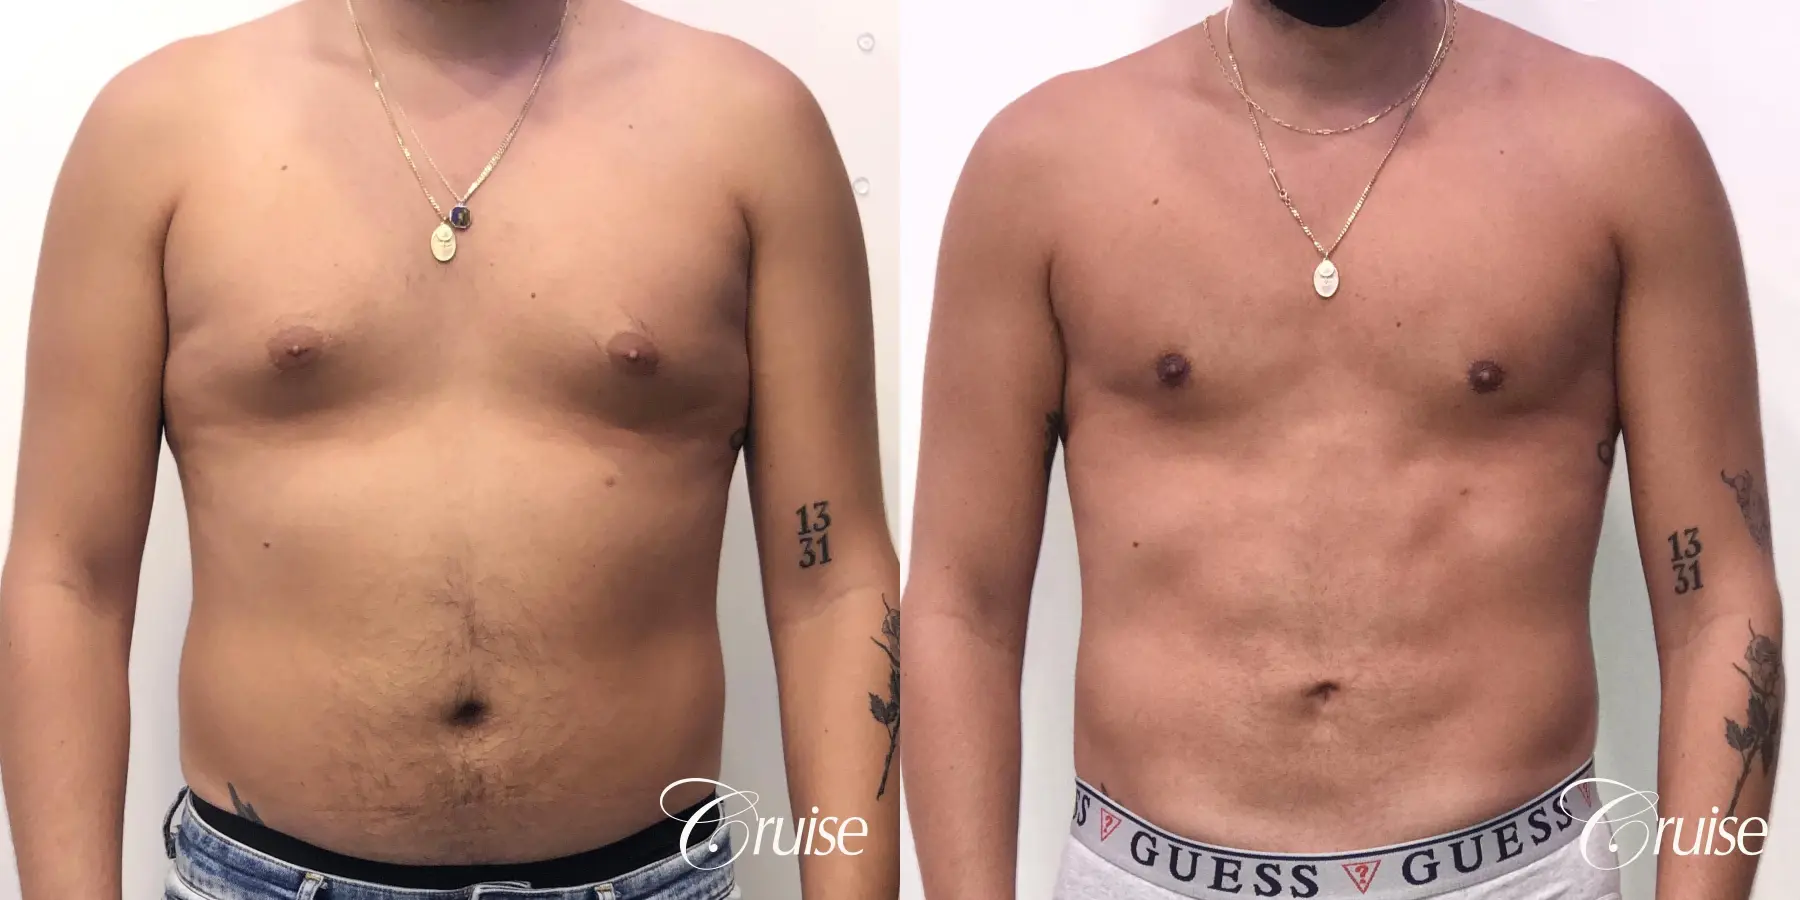 gynecomastia correction orange county - Before and After 1